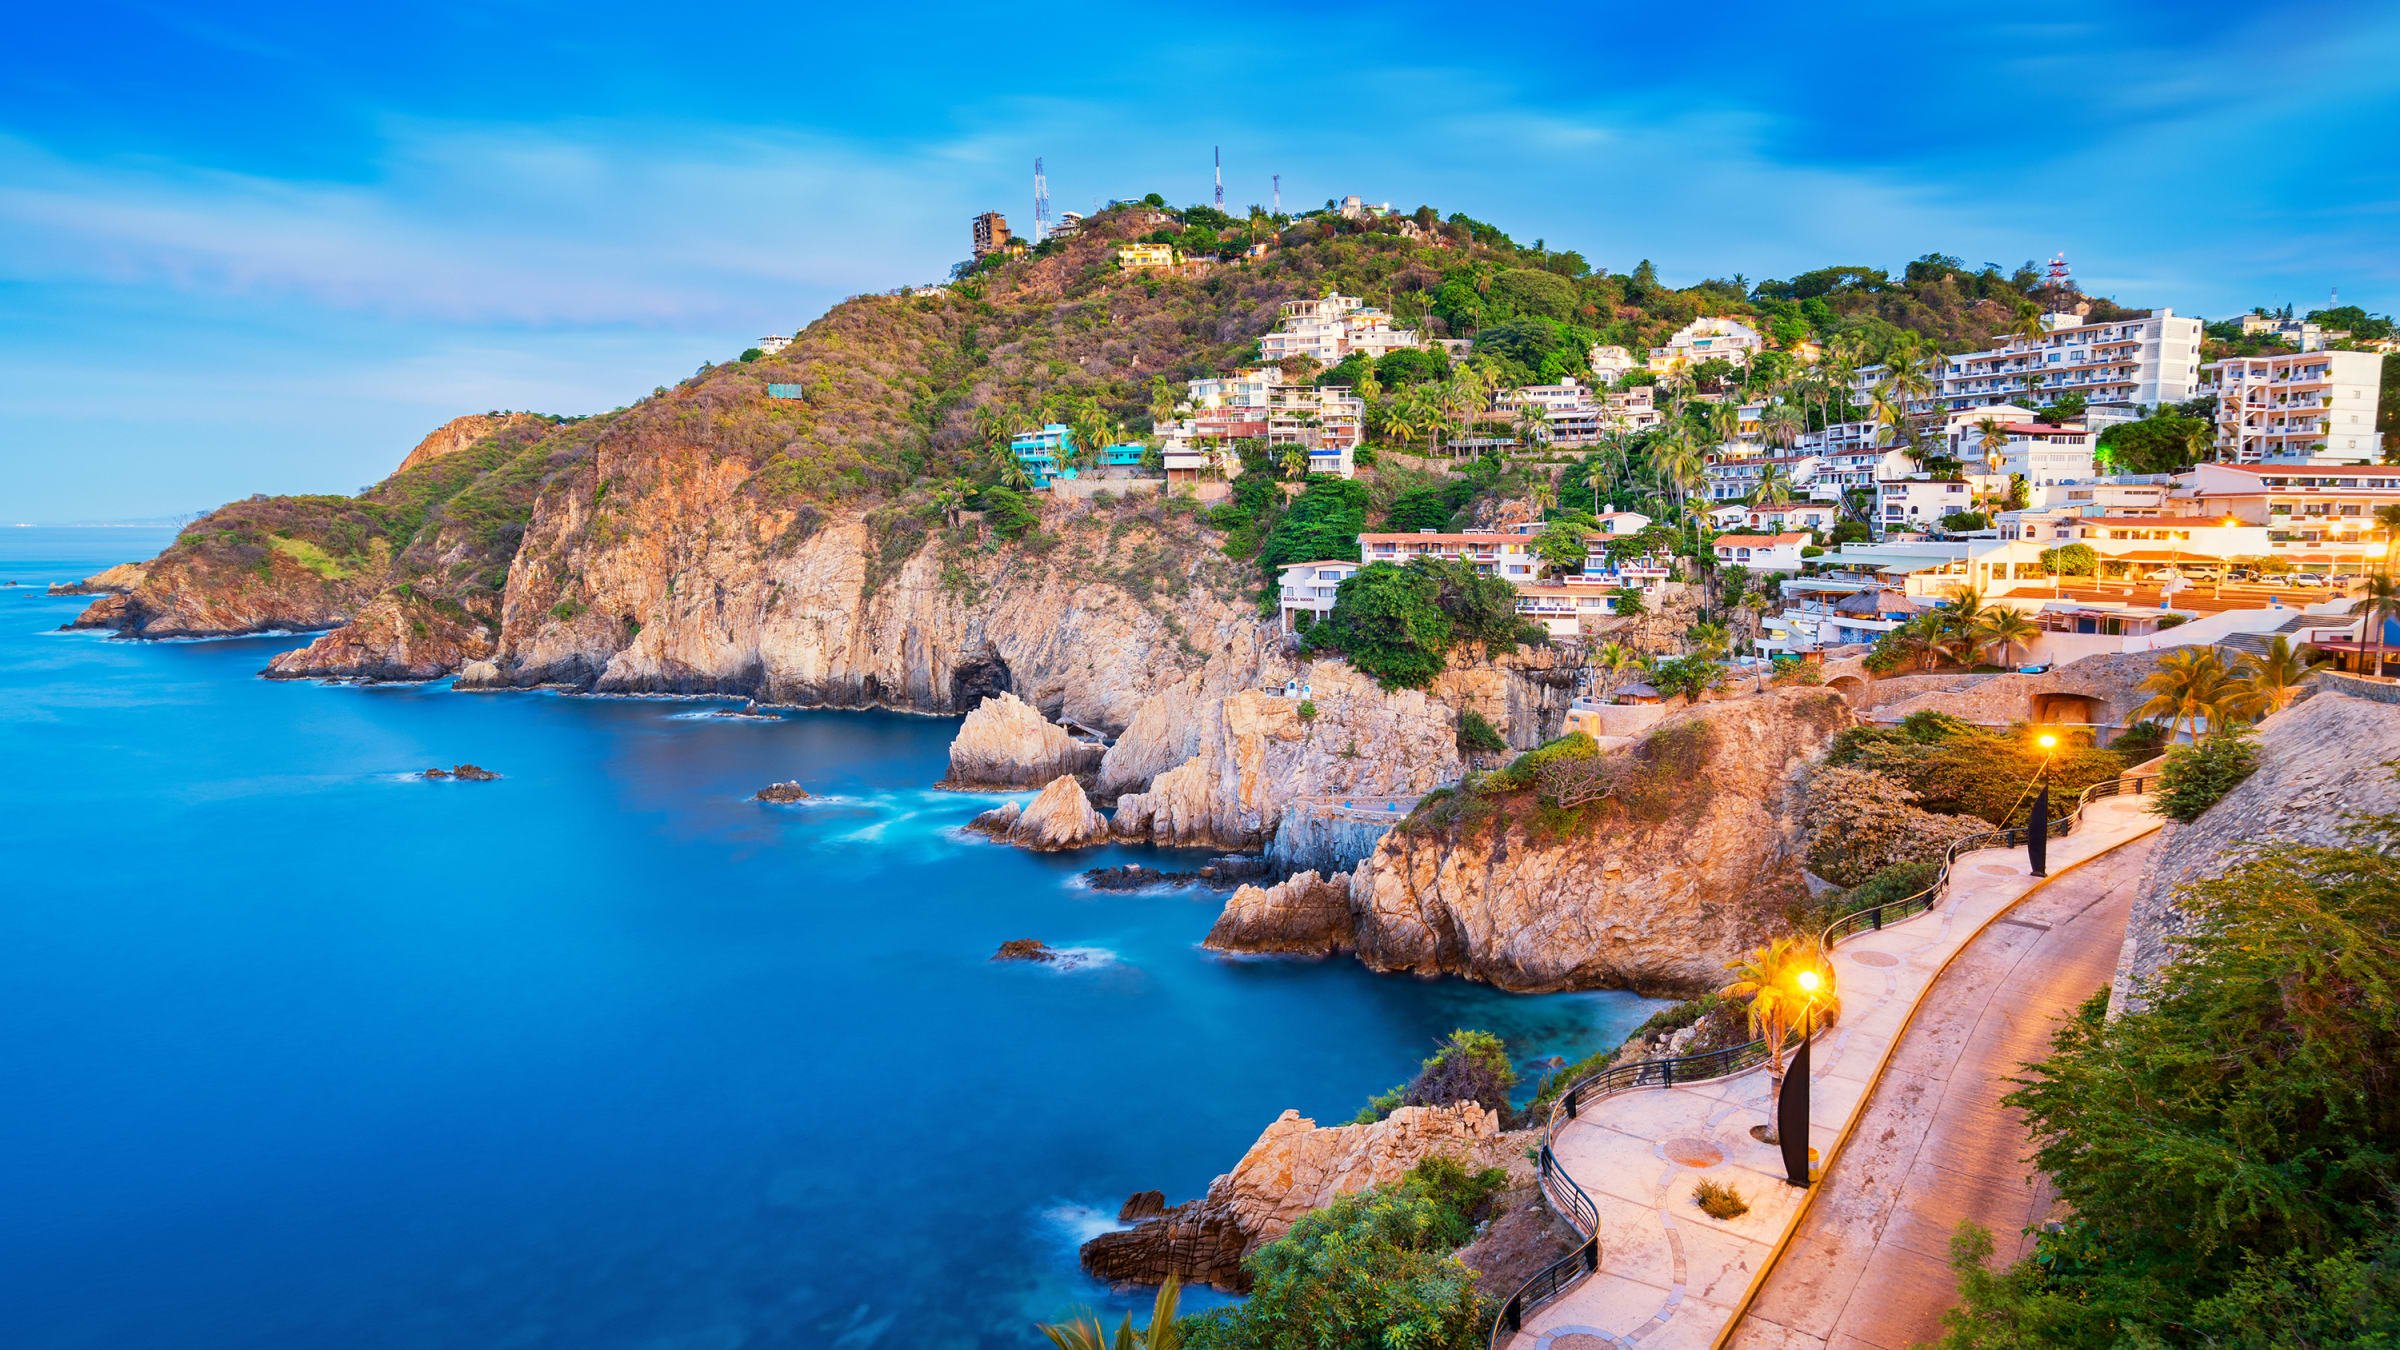 The perfect vacation in the exotic Acapulco